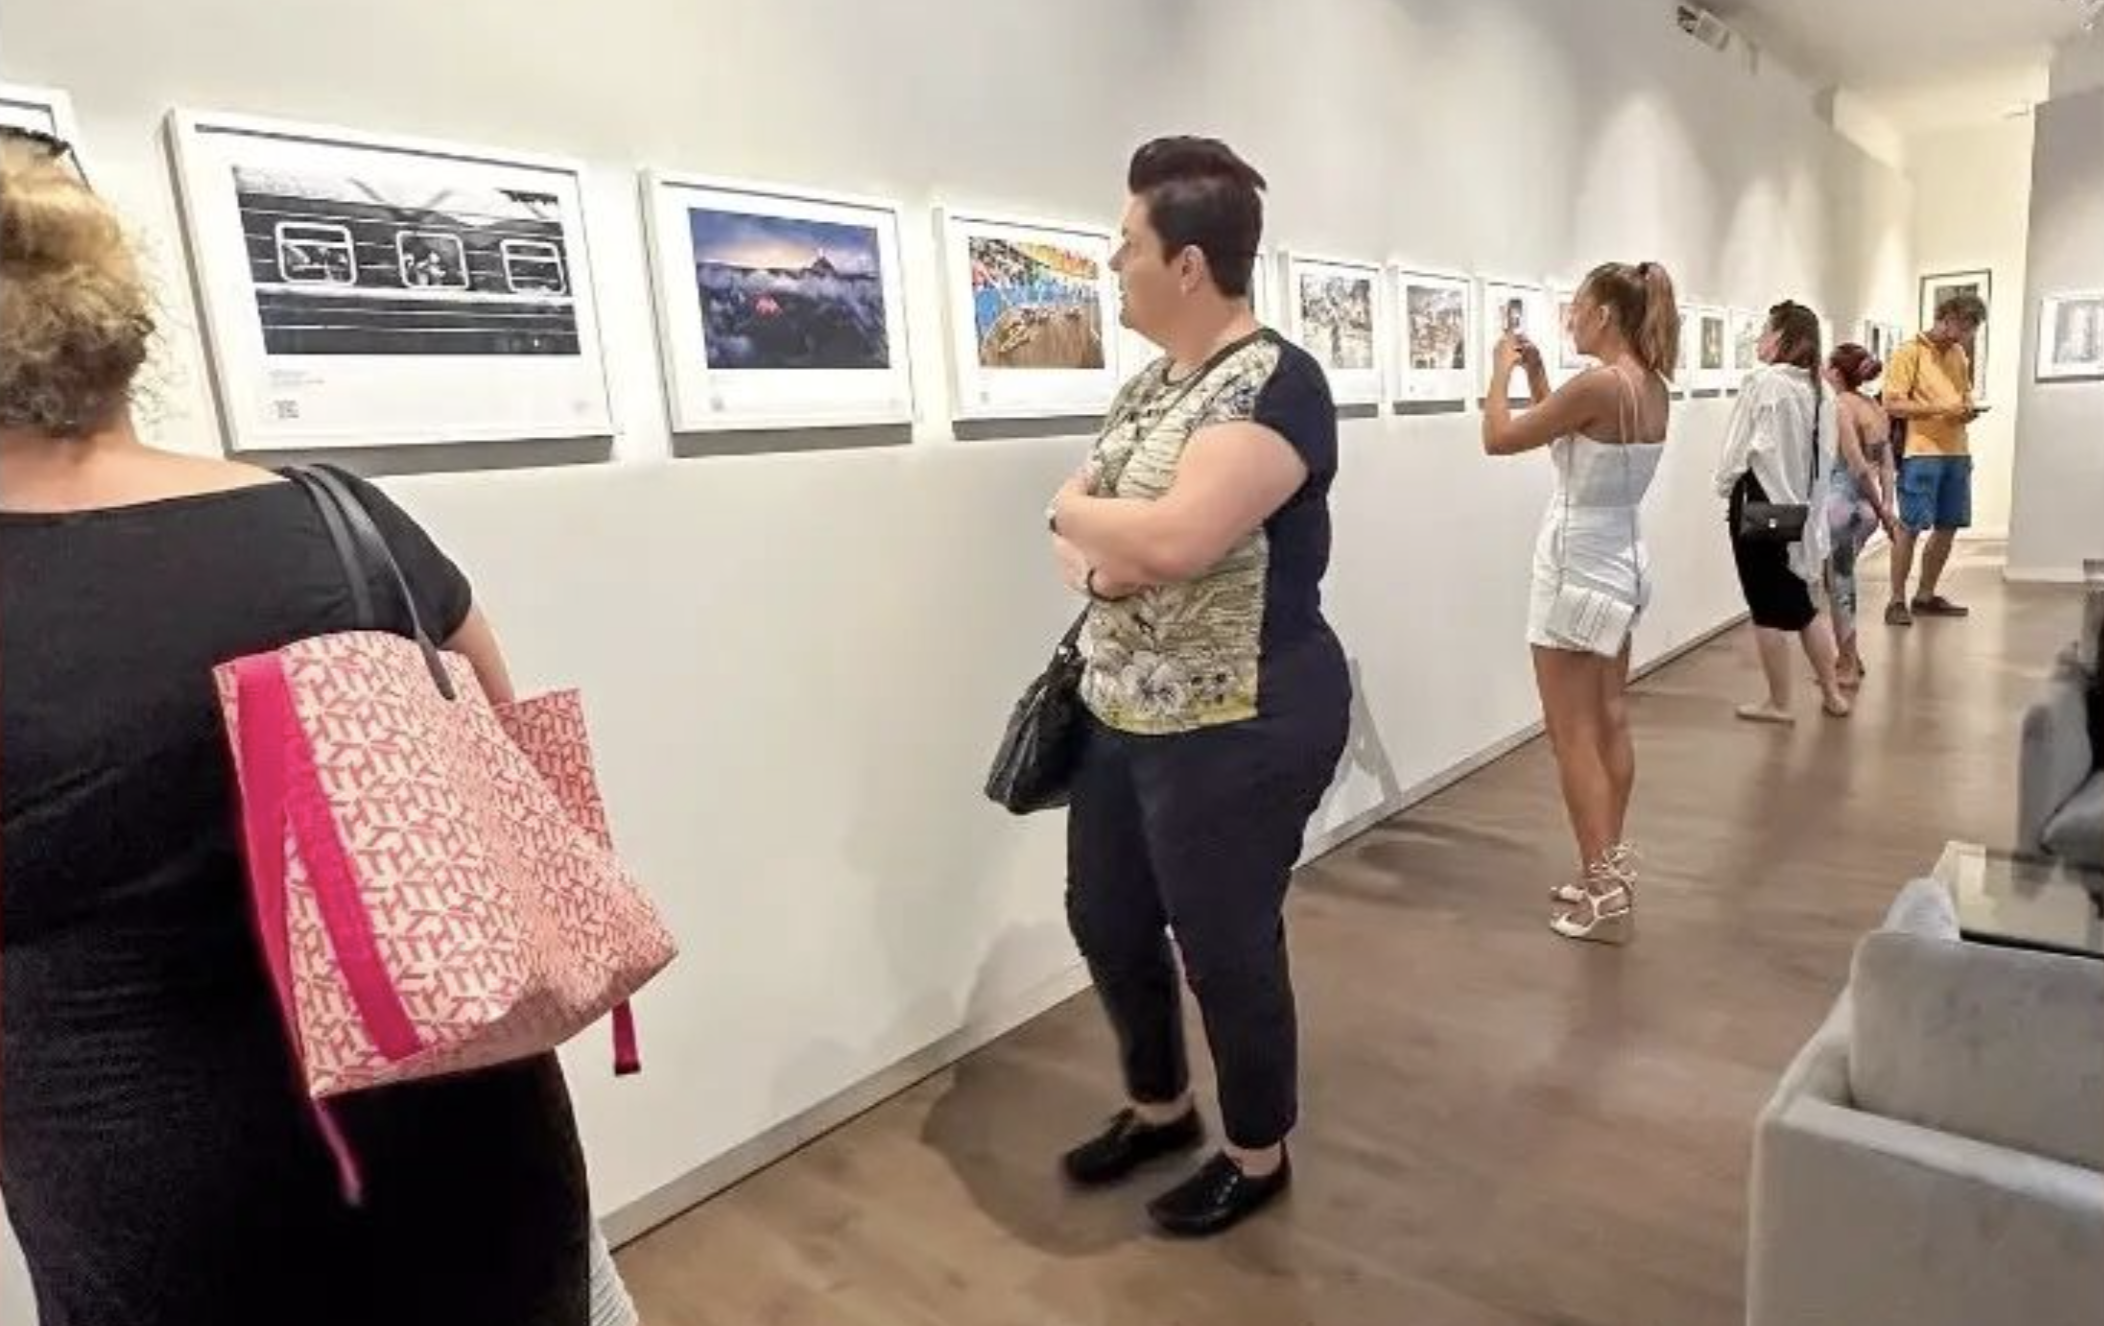 People stand and look at framed photographs on the wall.